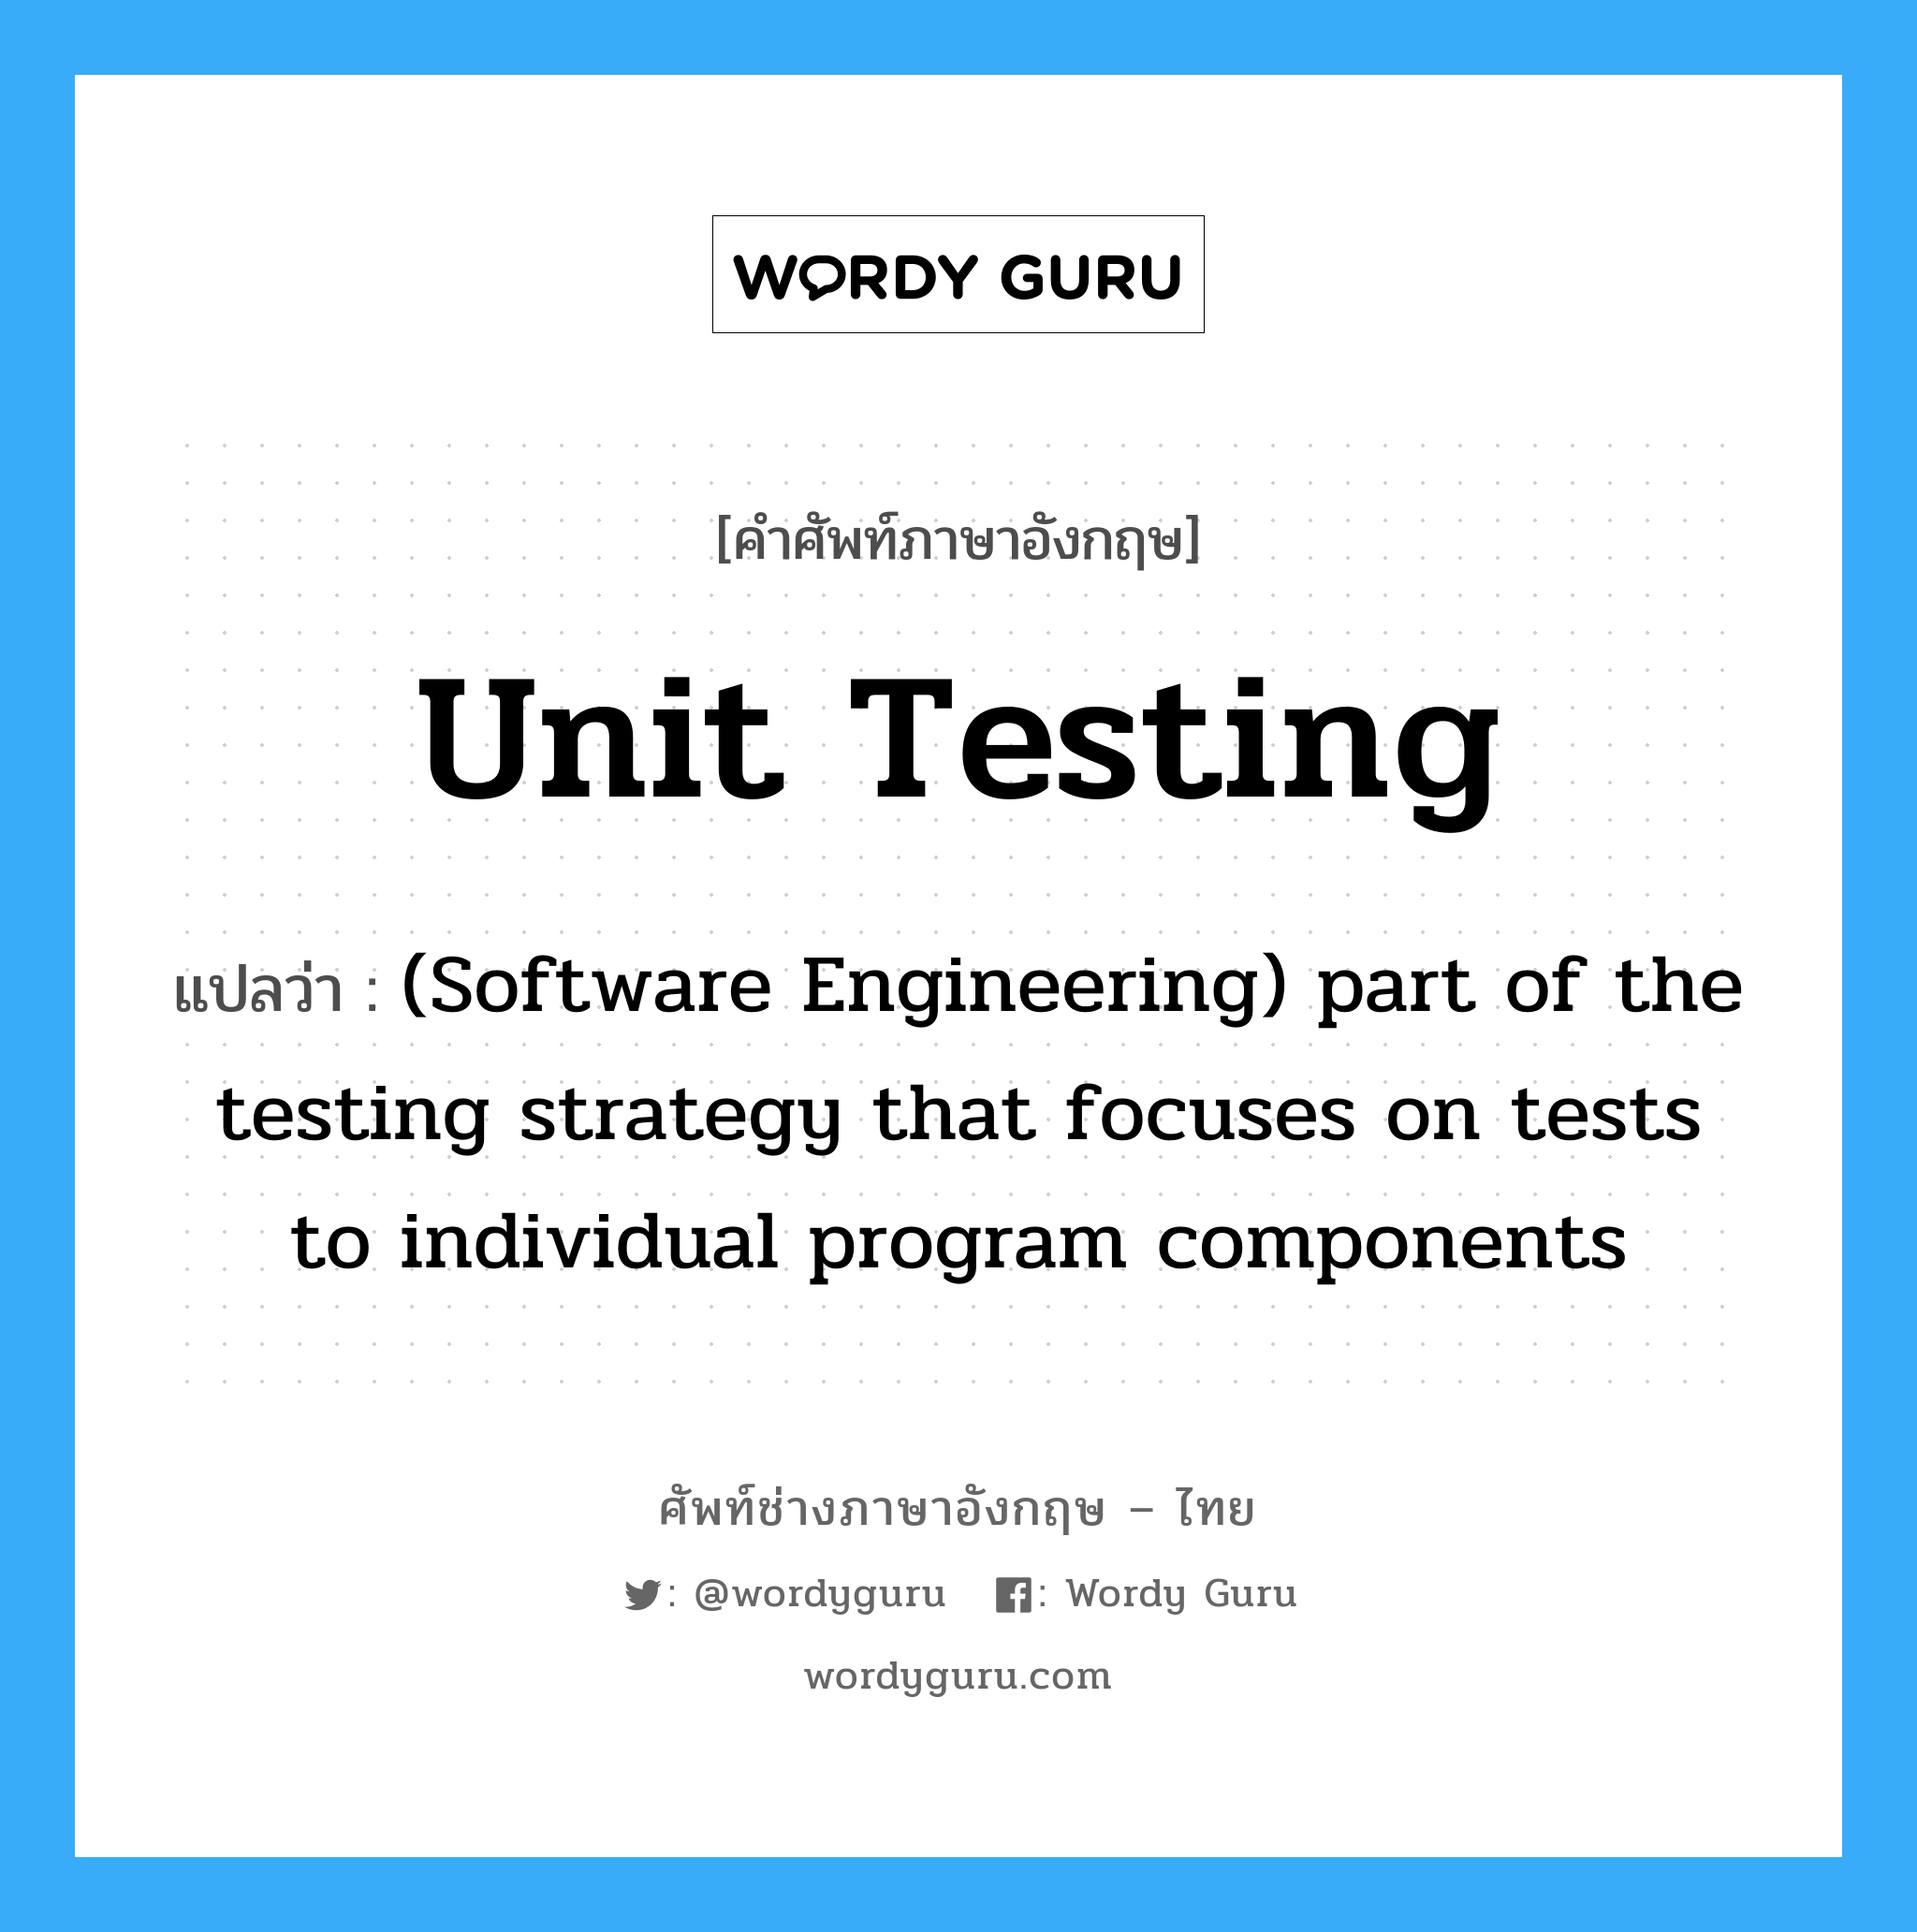 Unit testing แปลว่า?, คำศัพท์ช่างภาษาอังกฤษ - ไทย Unit testing คำศัพท์ภาษาอังกฤษ Unit testing แปลว่า (Software Engineering) part of the testing strategy that focuses on tests to individual program components